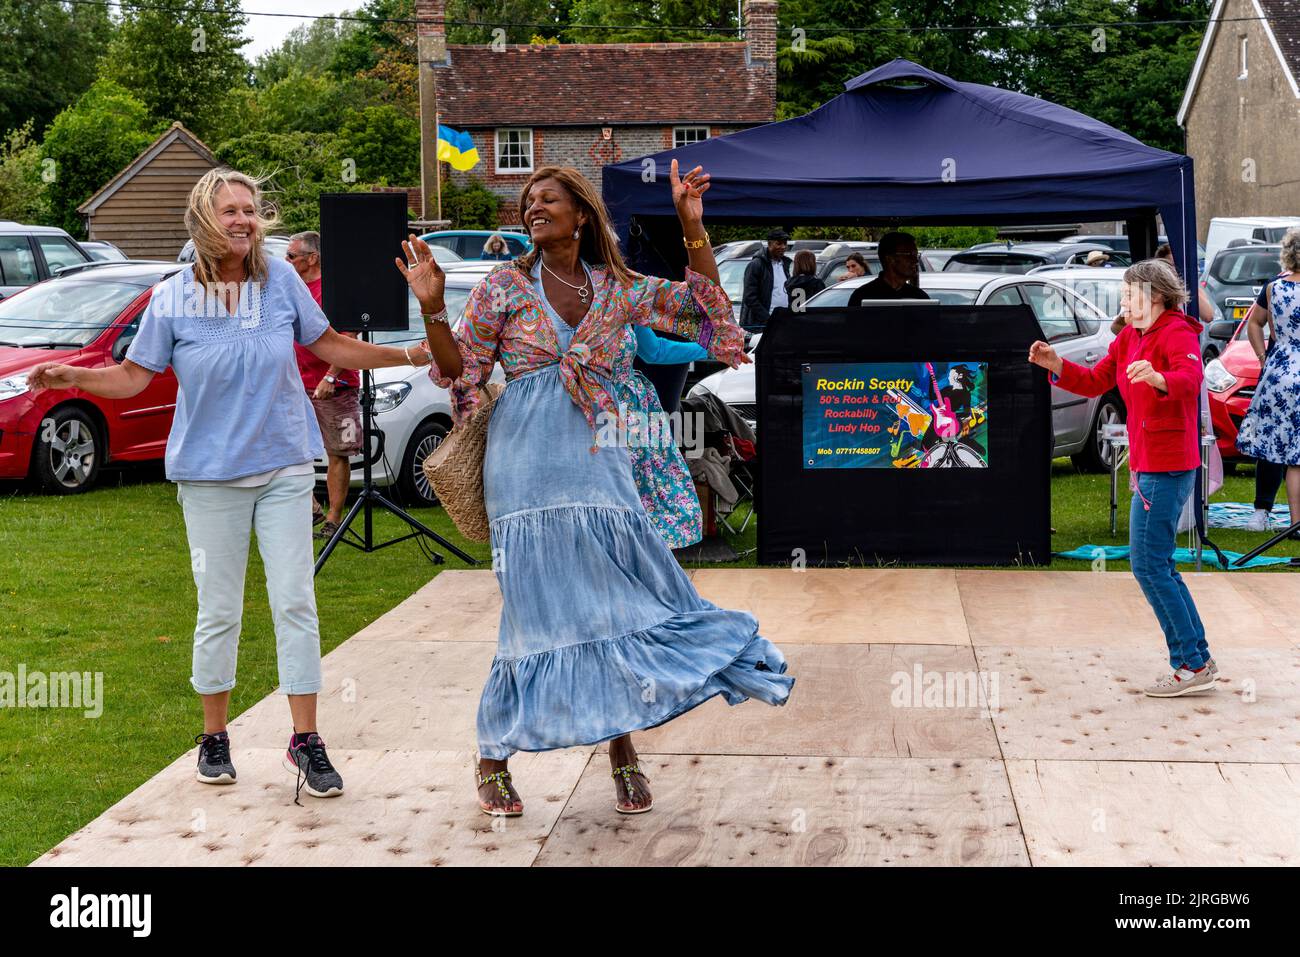 Women Dancing At The Annual Nutley Village Fete, Nutley, East Sussex, UK. Stock Photo